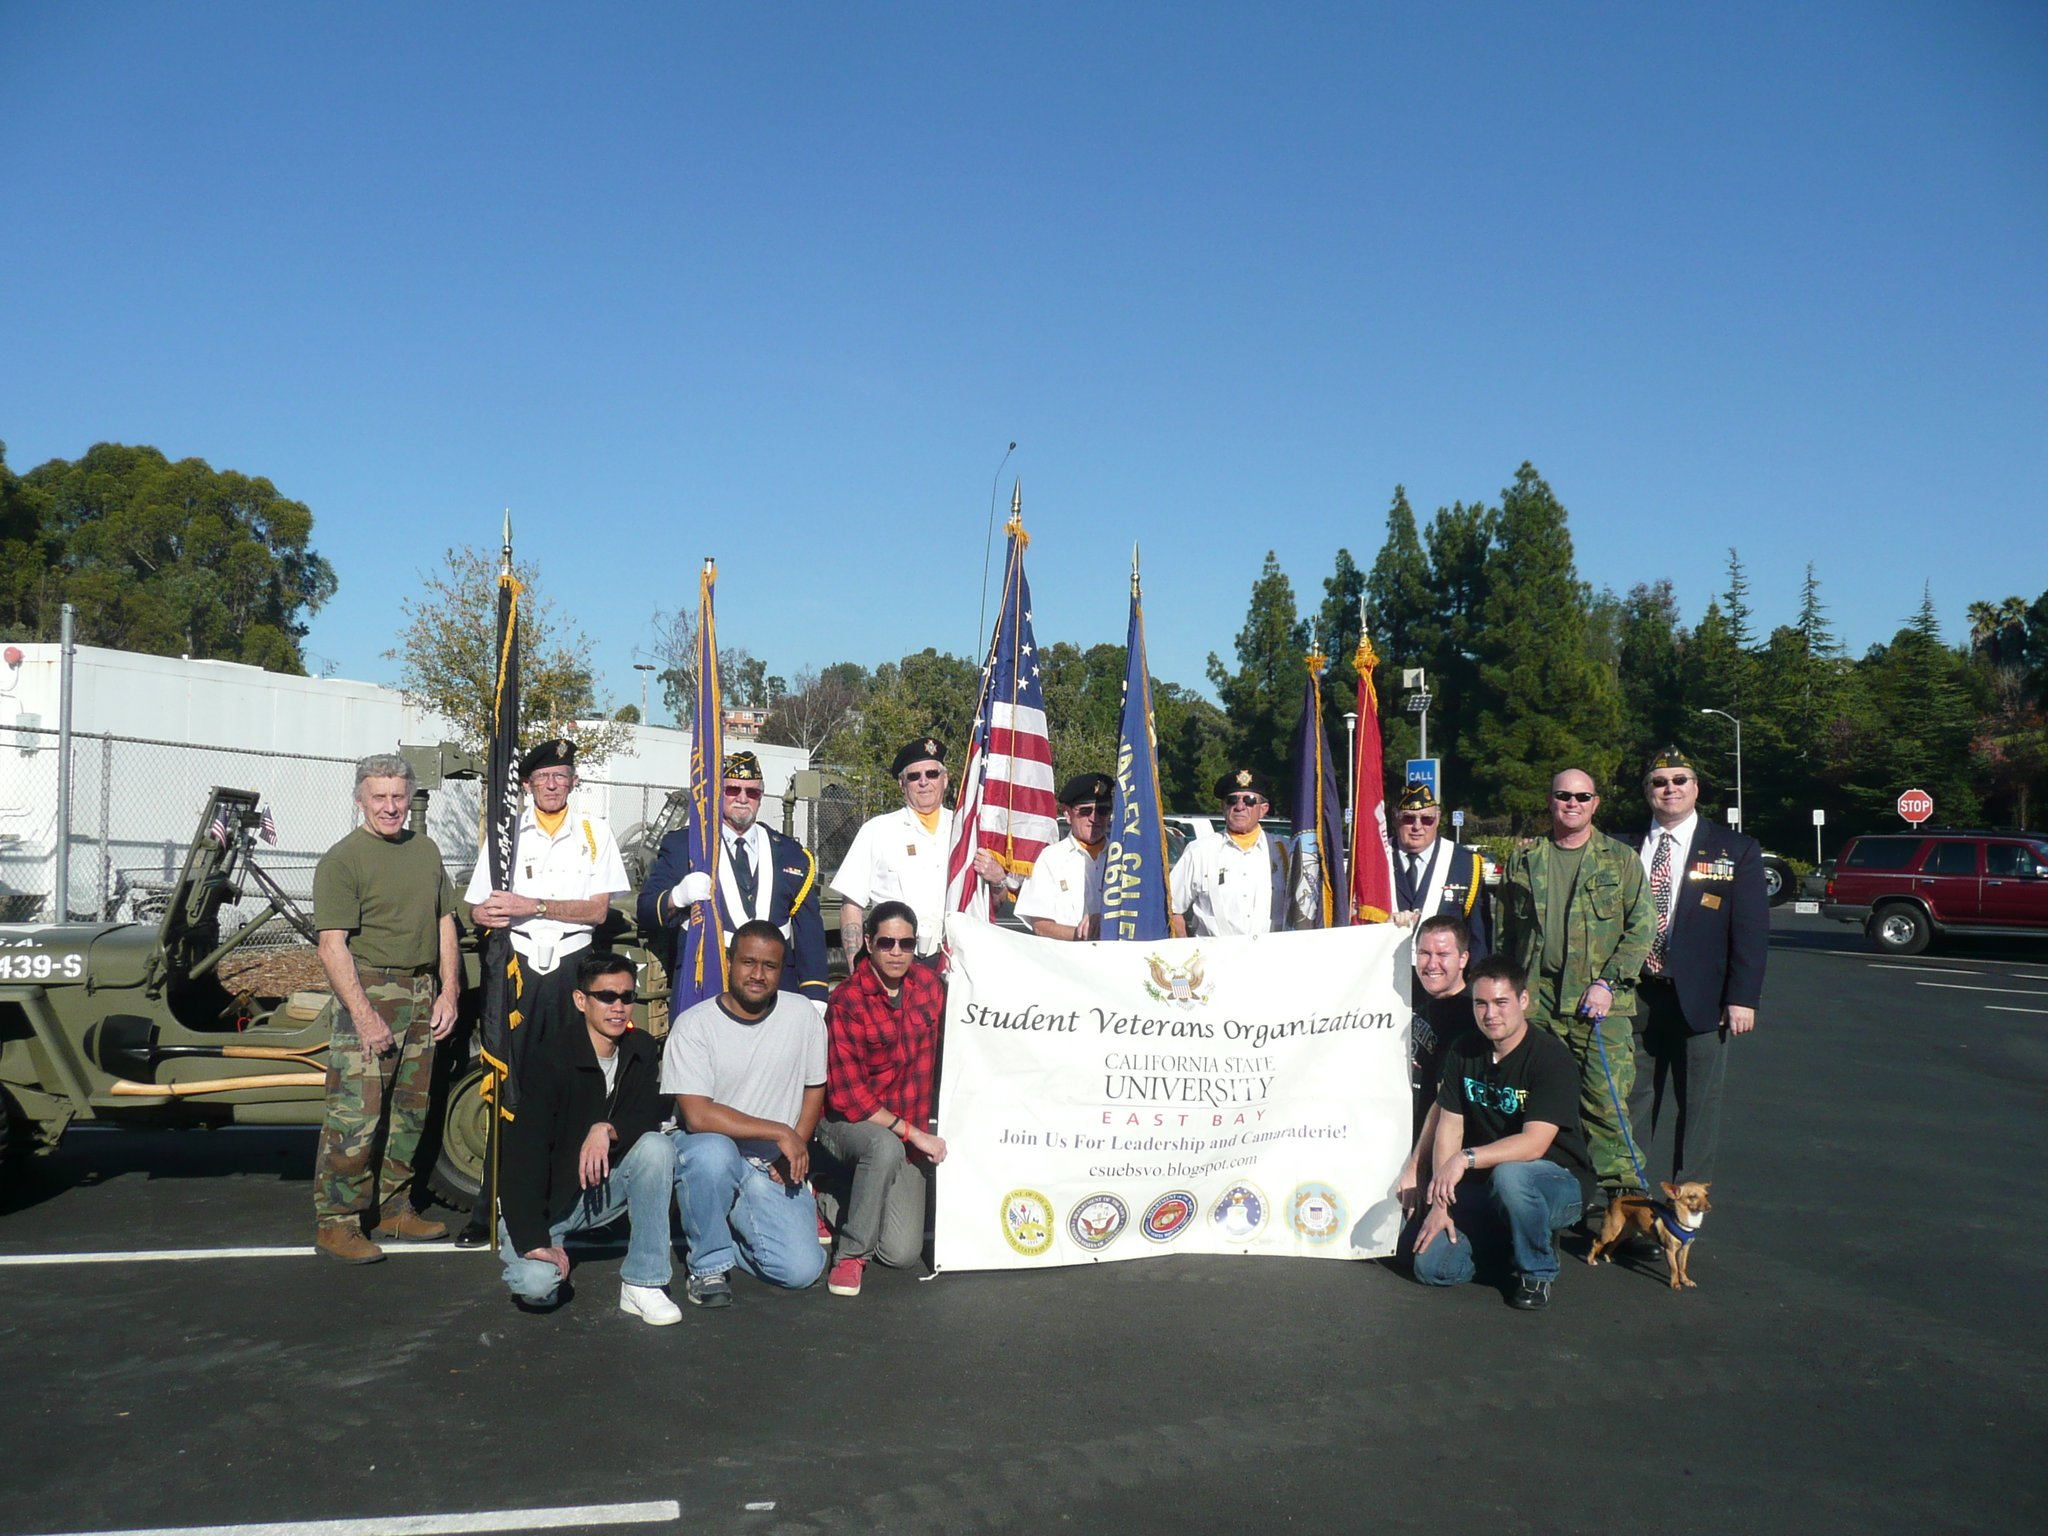 CSUEB student veterans participated in the 2011 Homecoming parade. (By: CSUEB SVO Facebook page)